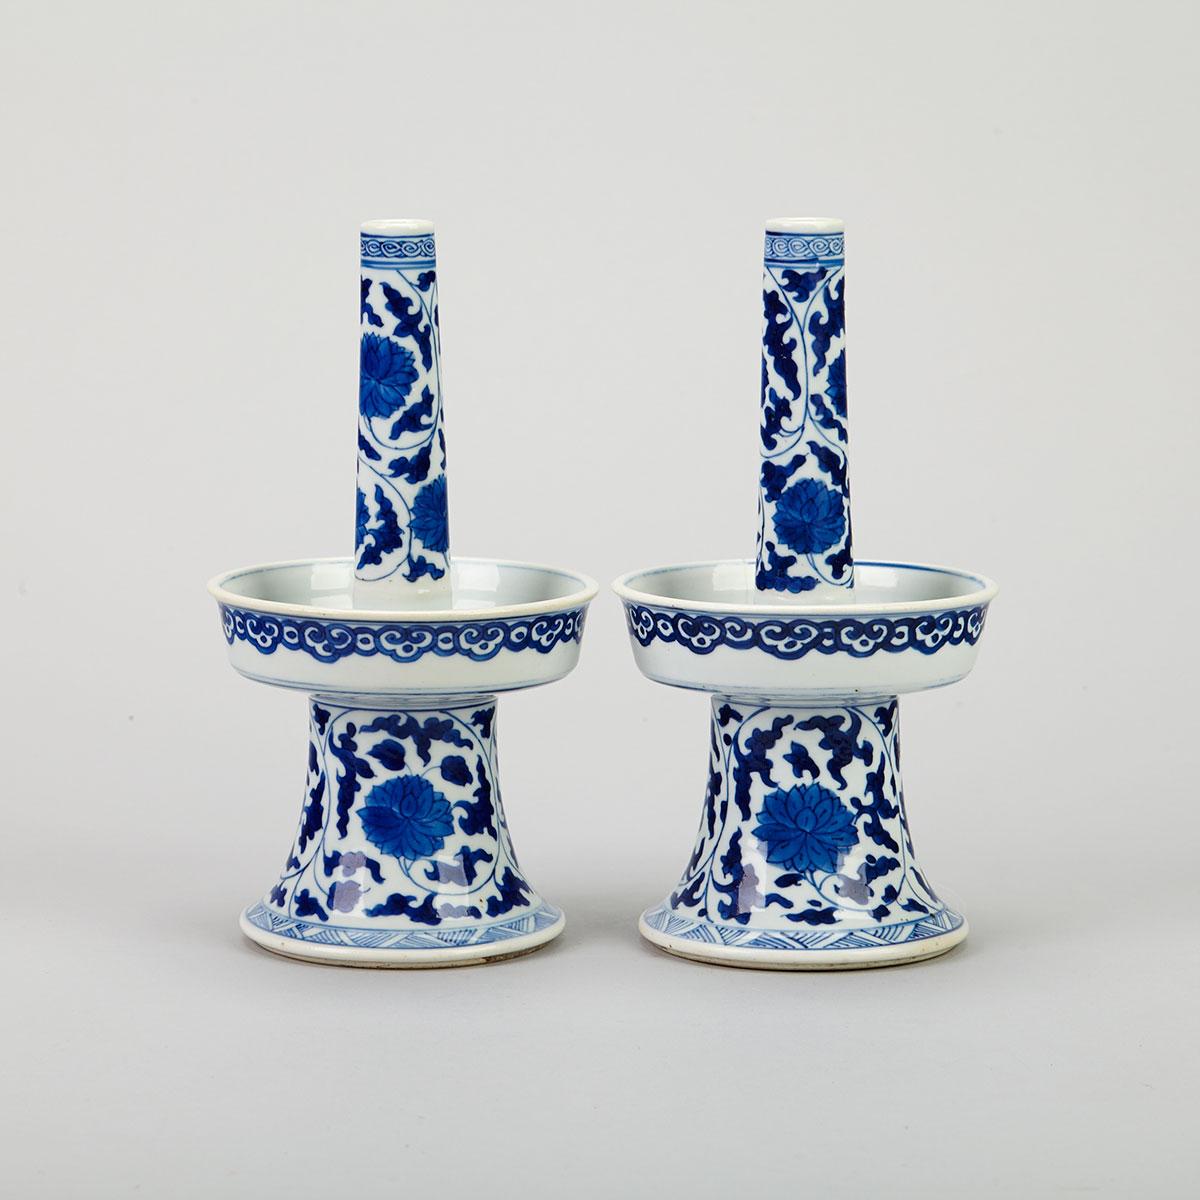 Pair of Export Blue and White Candle Prickets, Kangxi Period (1662-1722)